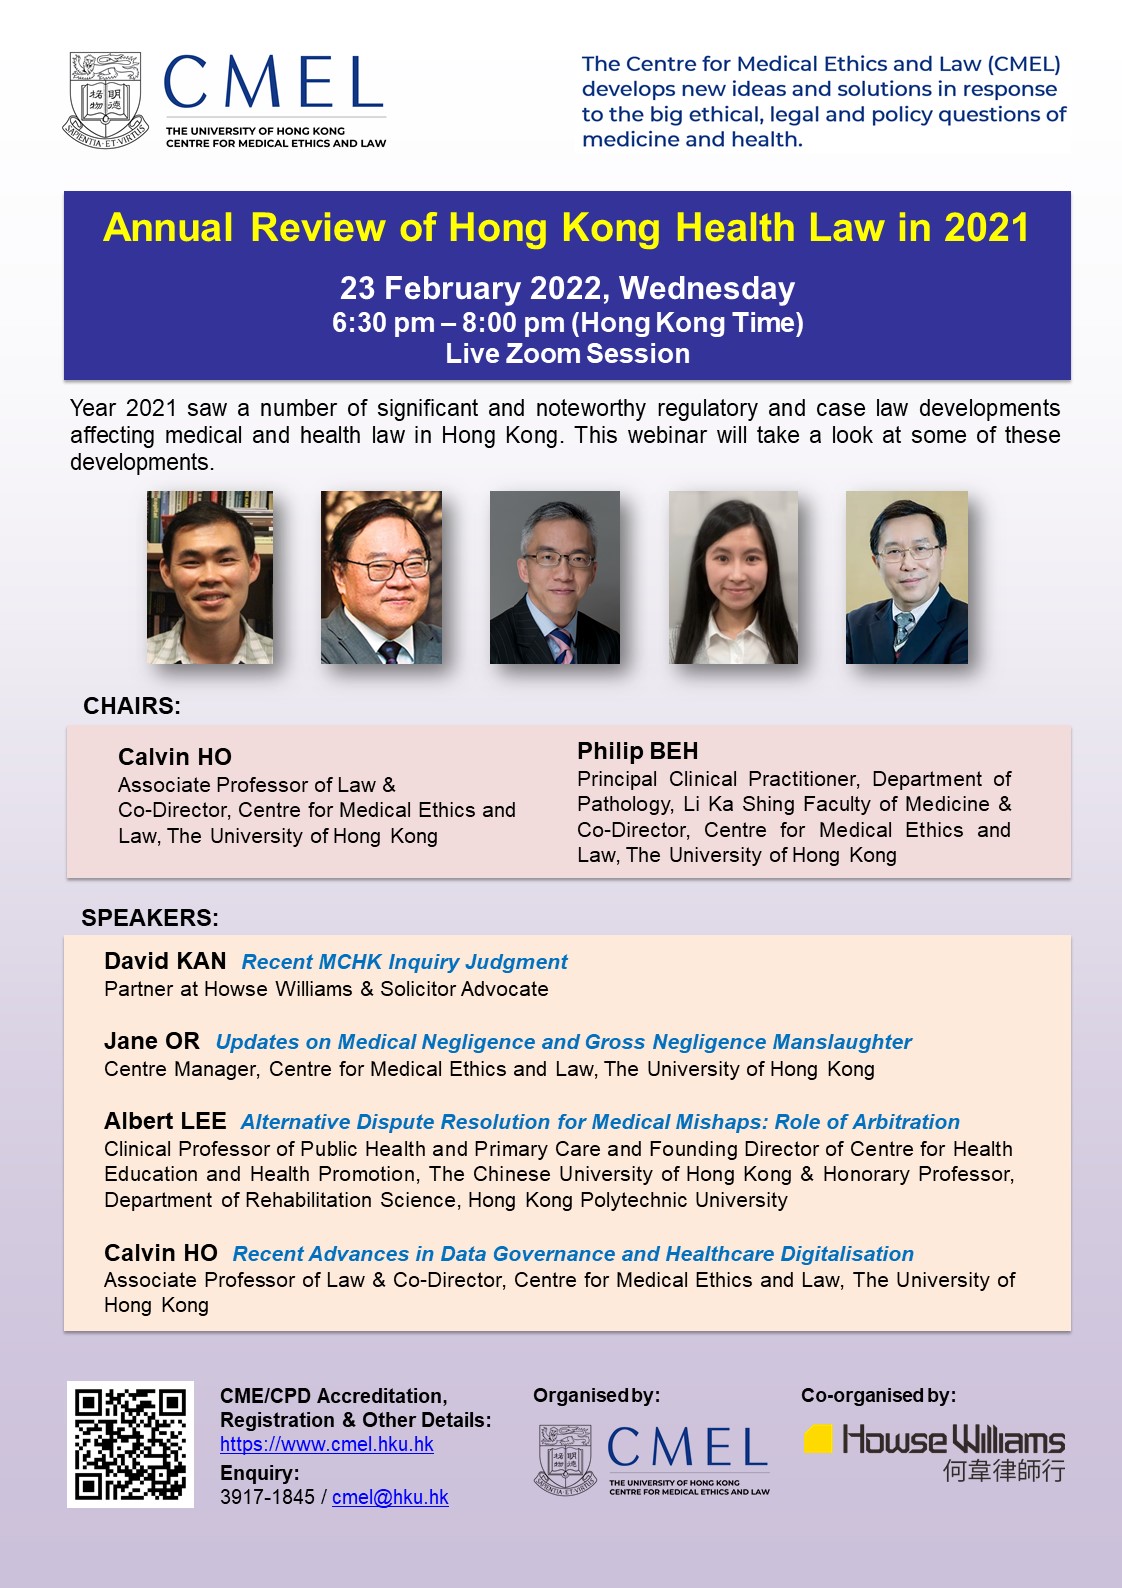 Poster for Annual Review of HK Health Law in 2021 Webinar